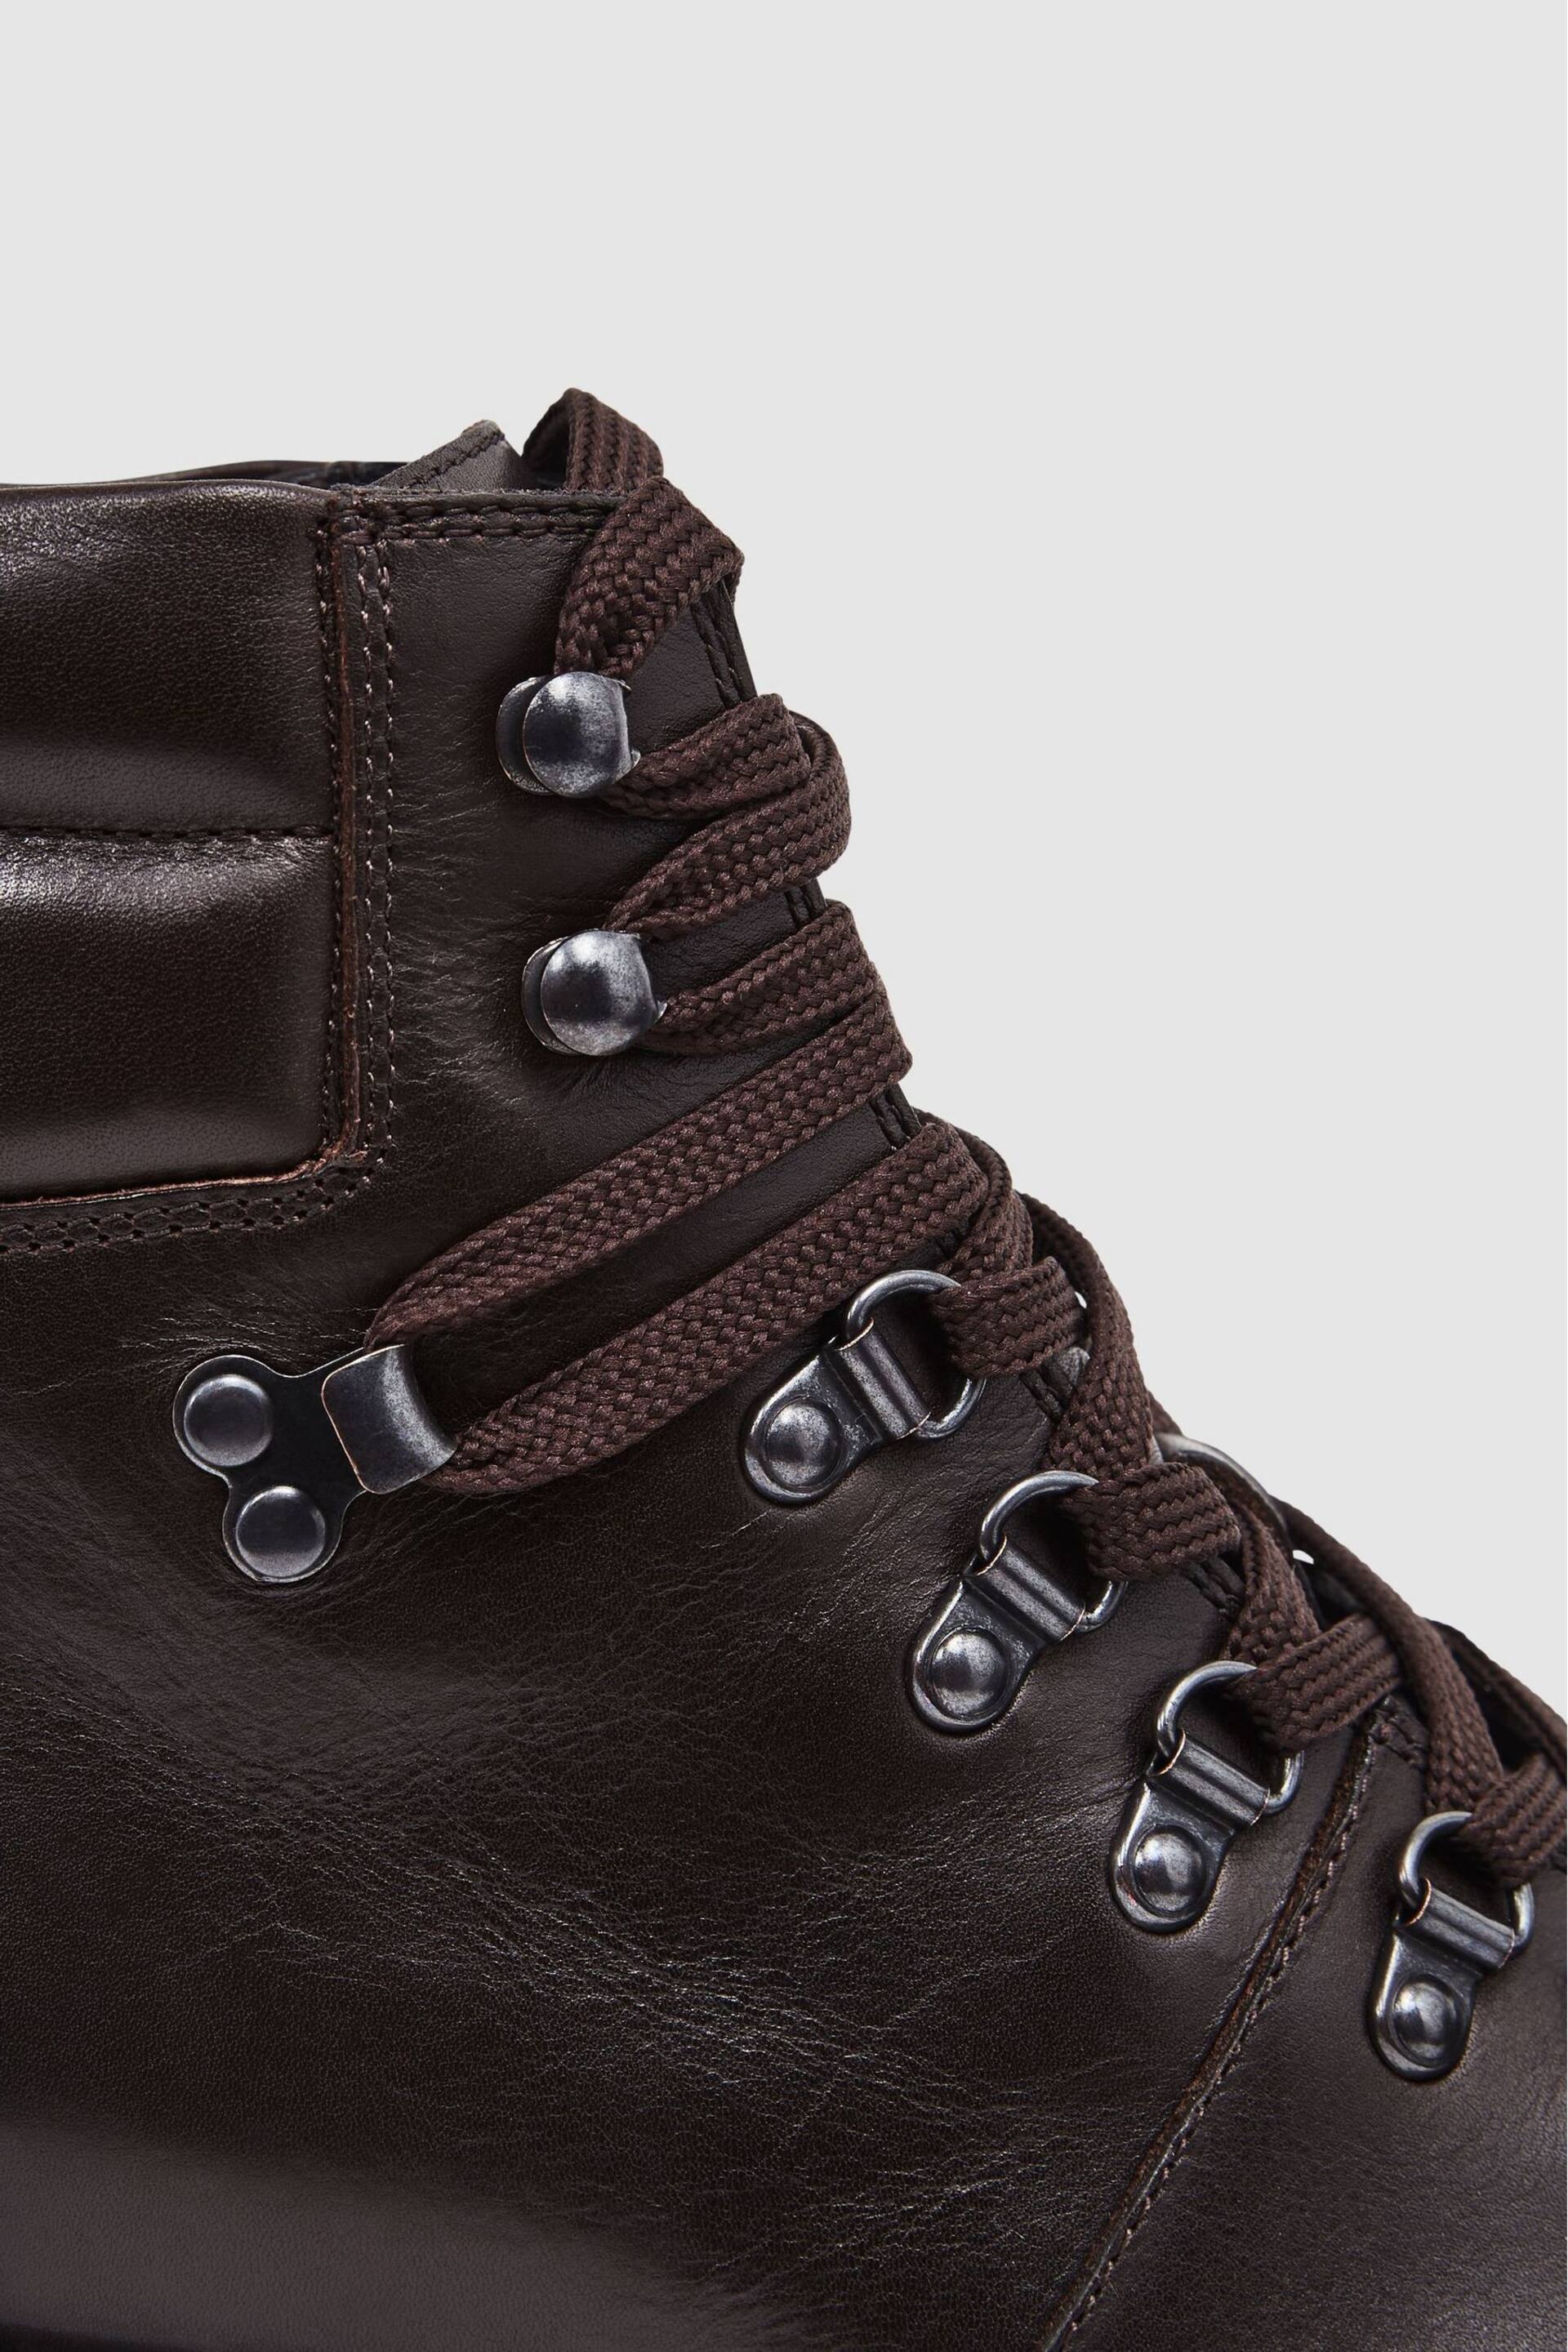 Reiss Dark Brown Amwell Leather Hiking Boots - Image 8 of 8